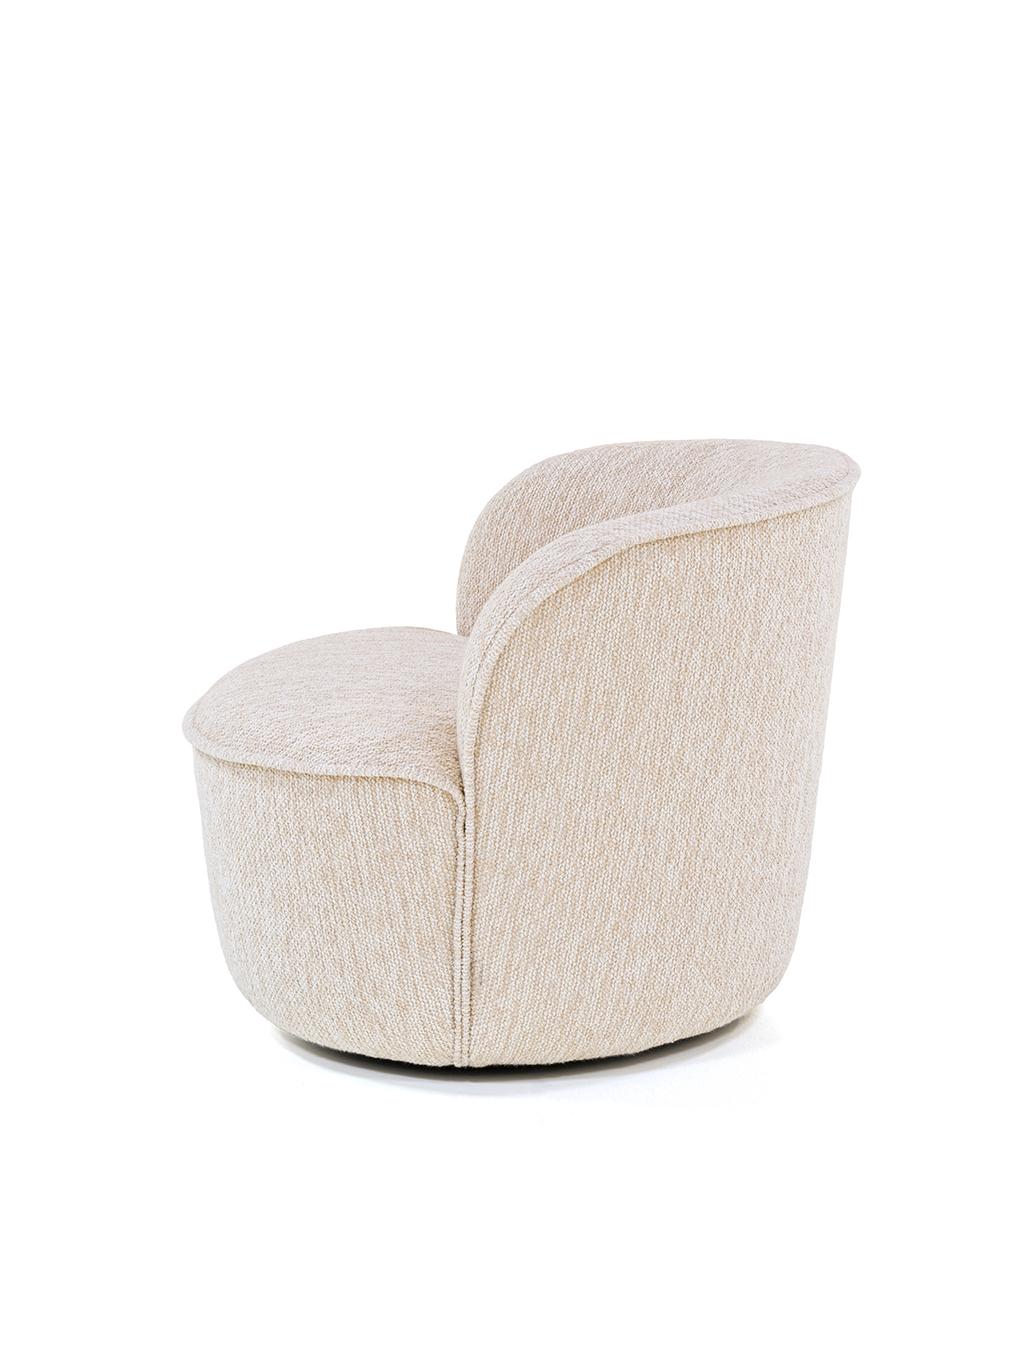 Customizable Wittmann Swivel Bun Armchair by Federica Biasi In New Condition For Sale In New York, NY